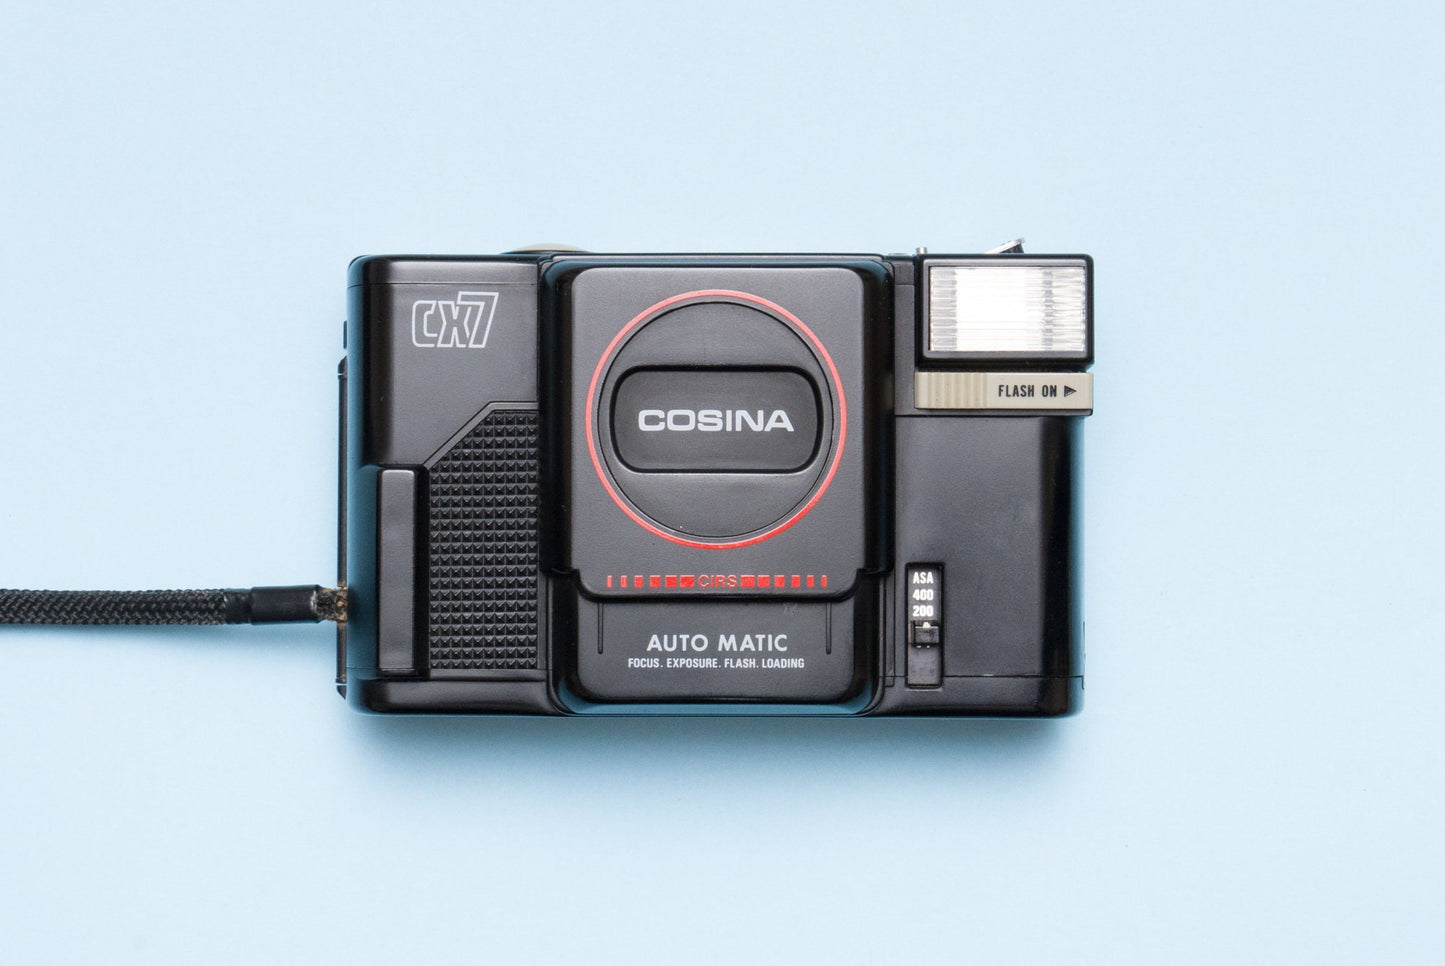 Cosina CX7 Compact 35mm Point and Shoot Film Camera